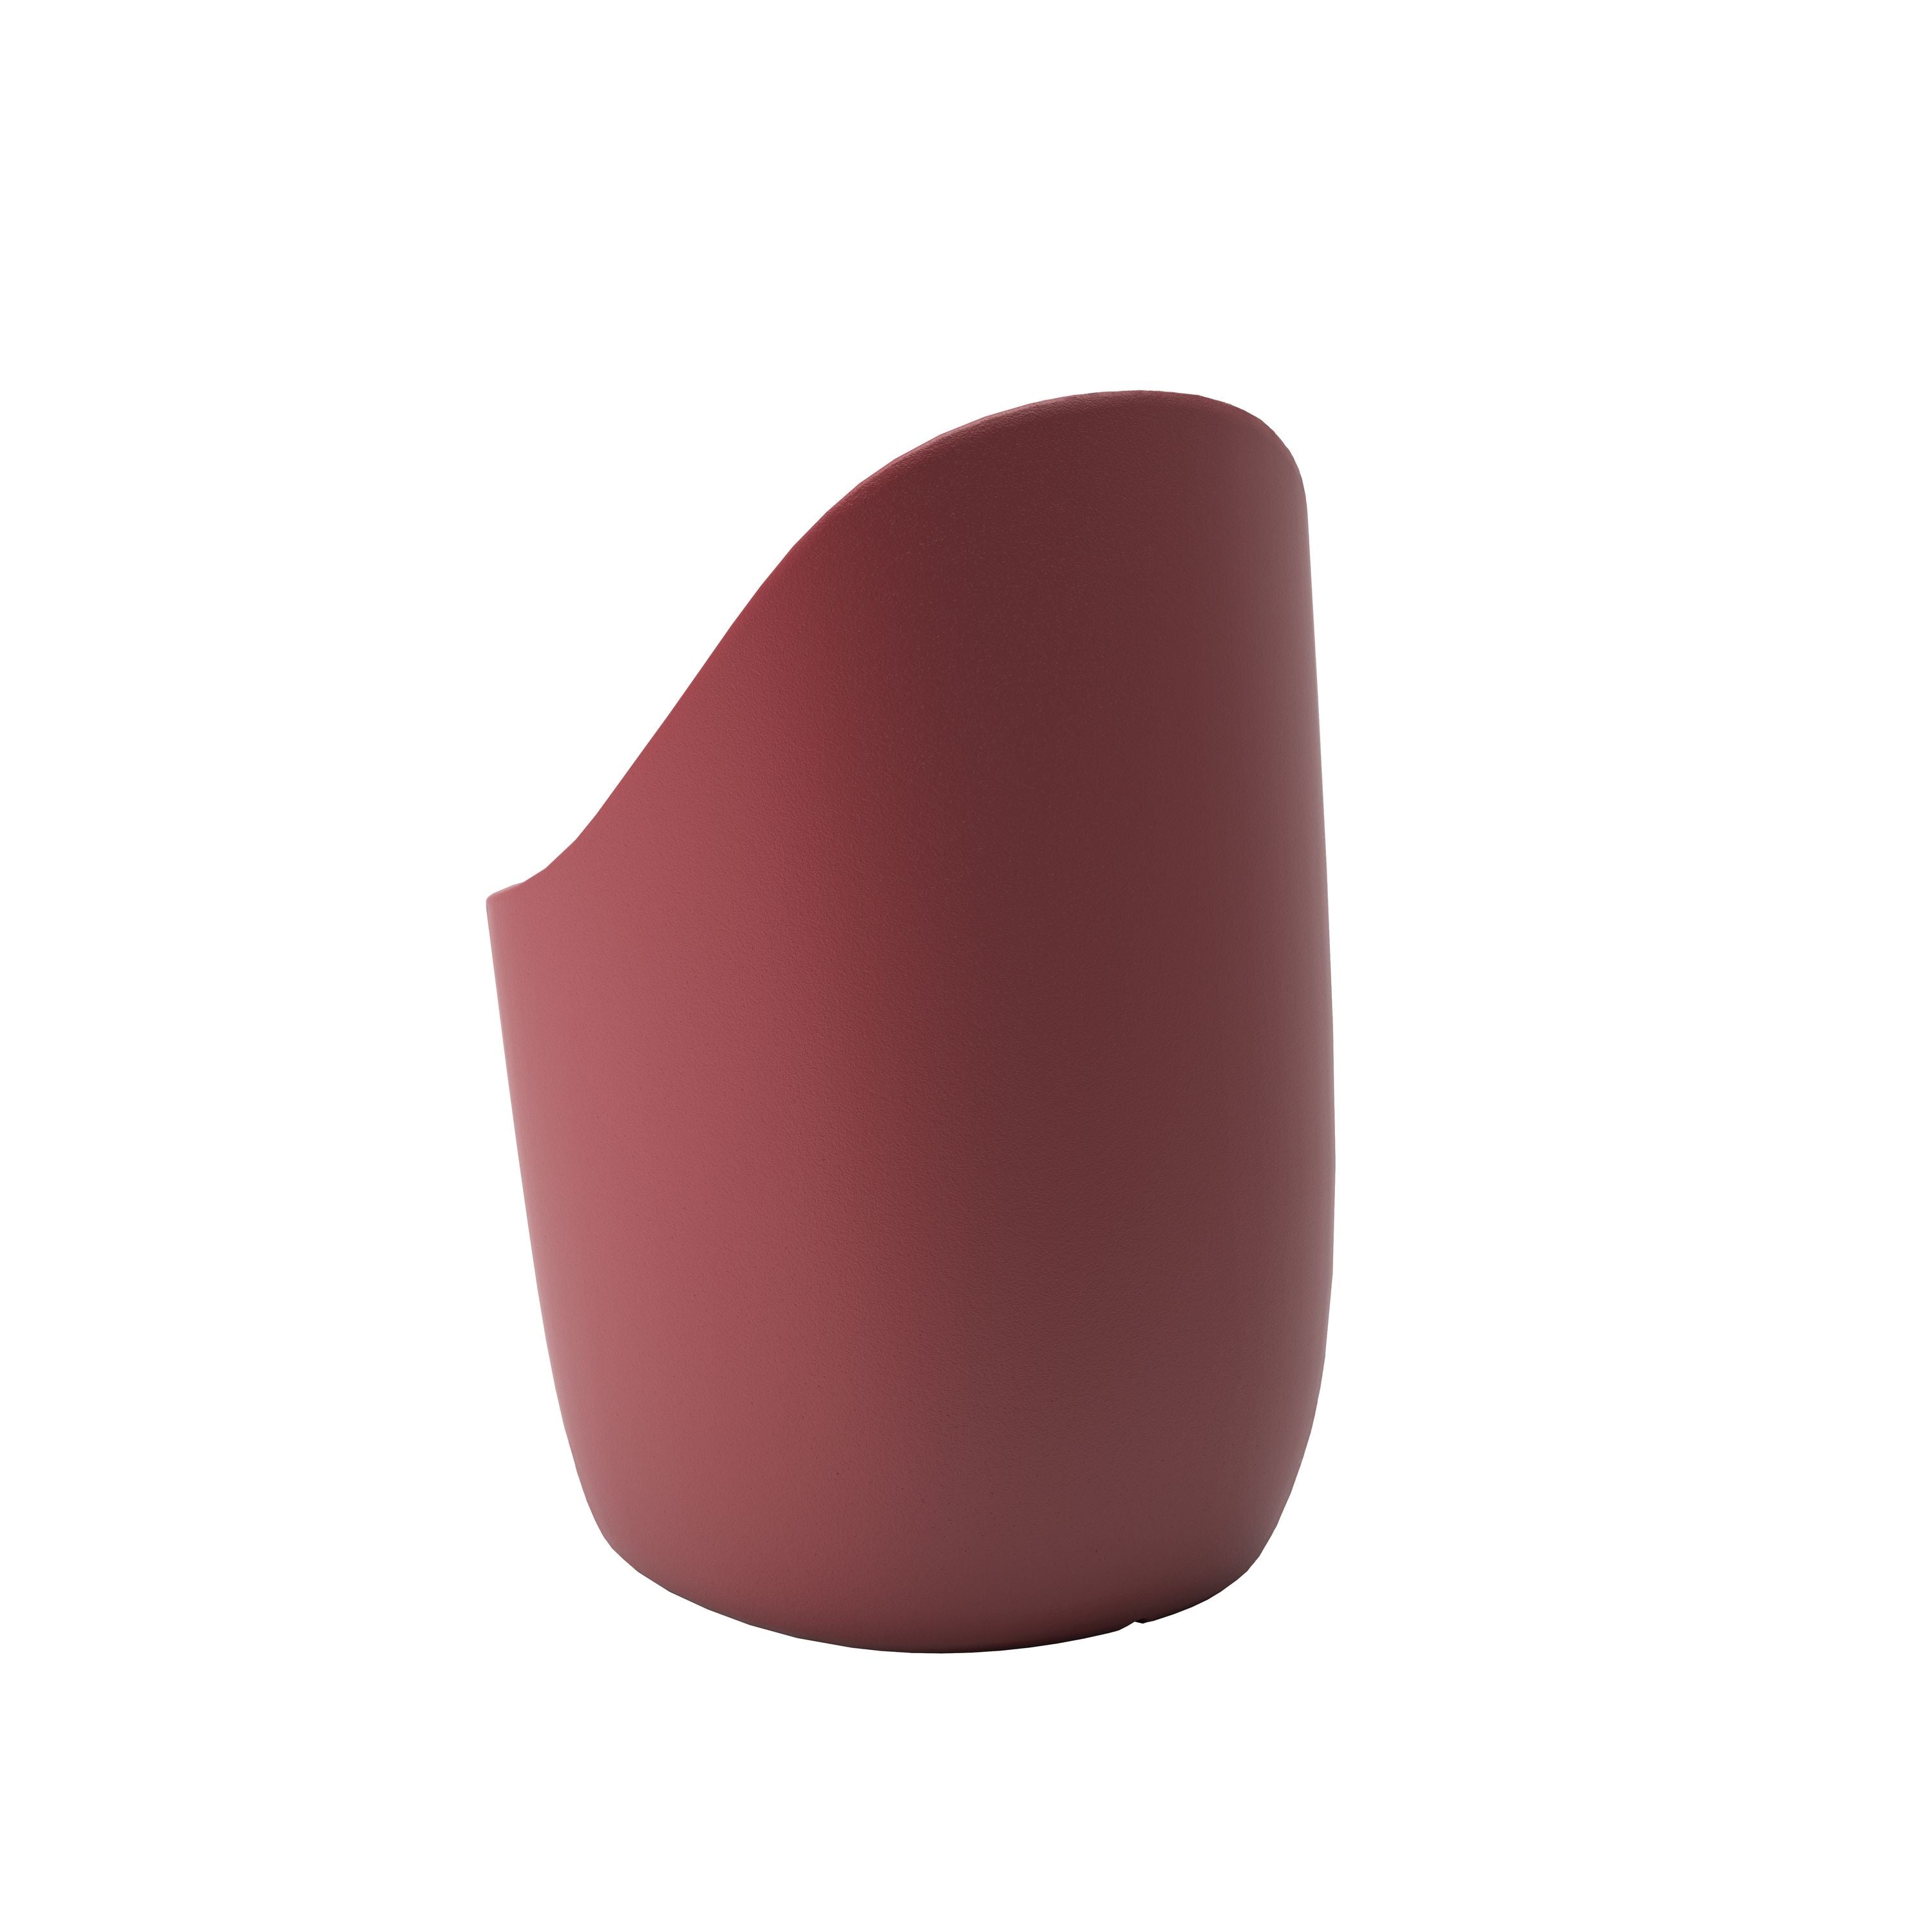 Qeeboo Cobble Chair, Indian Red